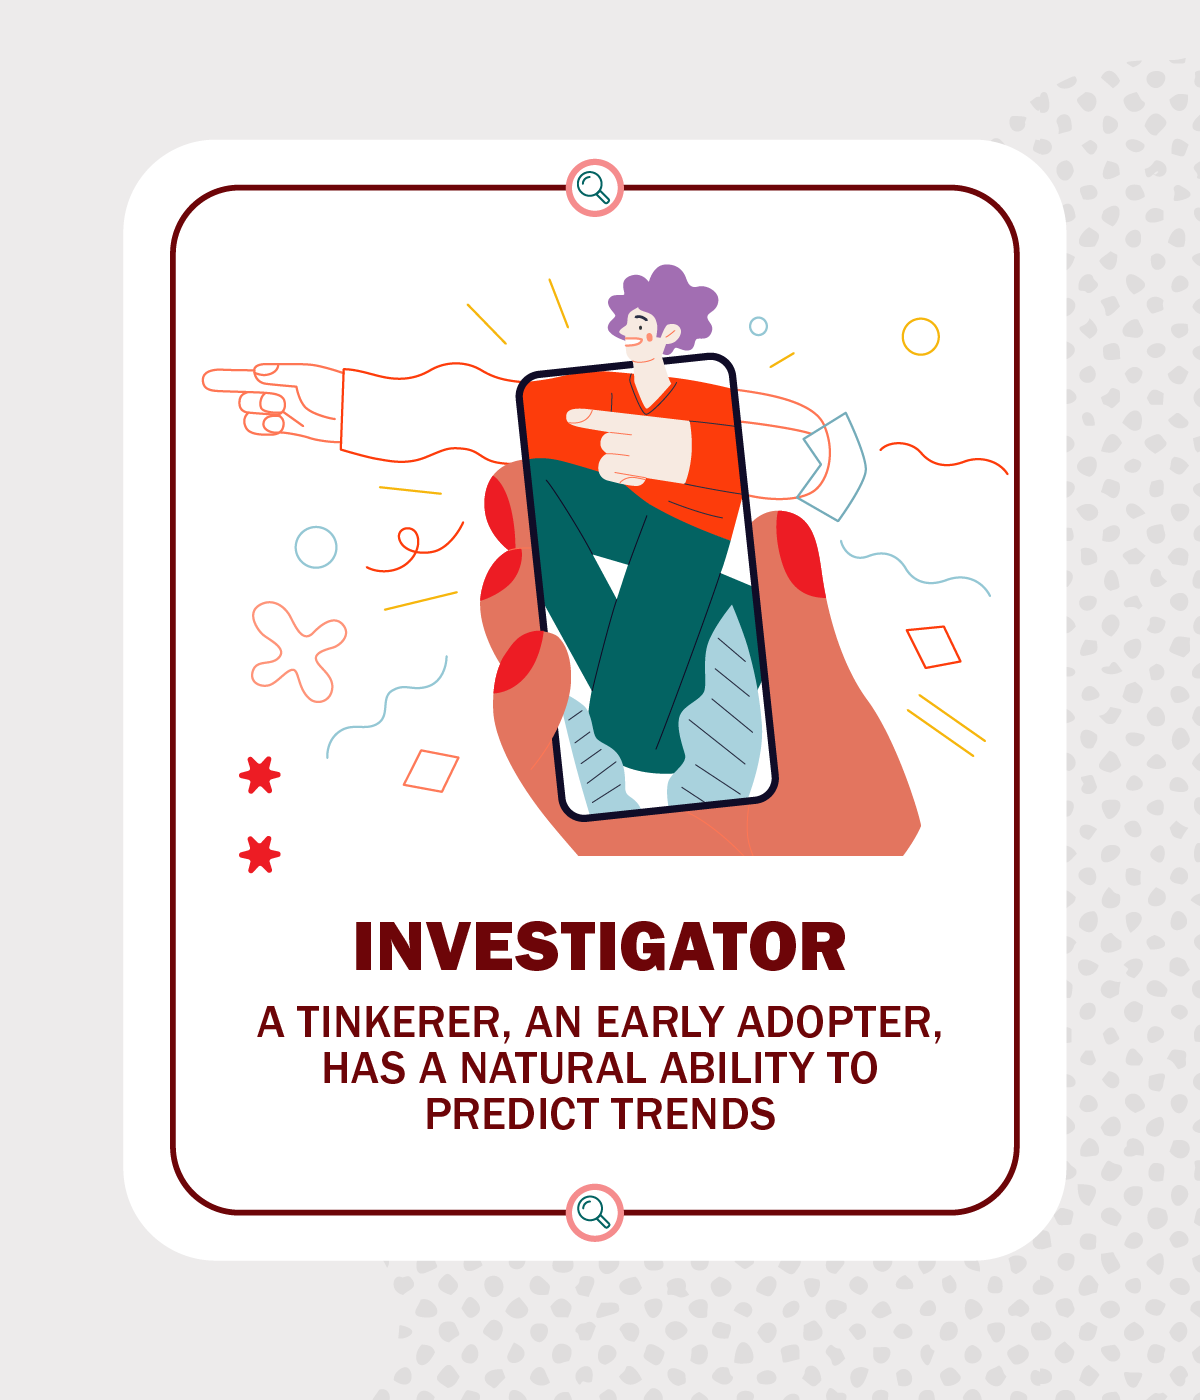 hand holding a mobile phone, investigator persona card